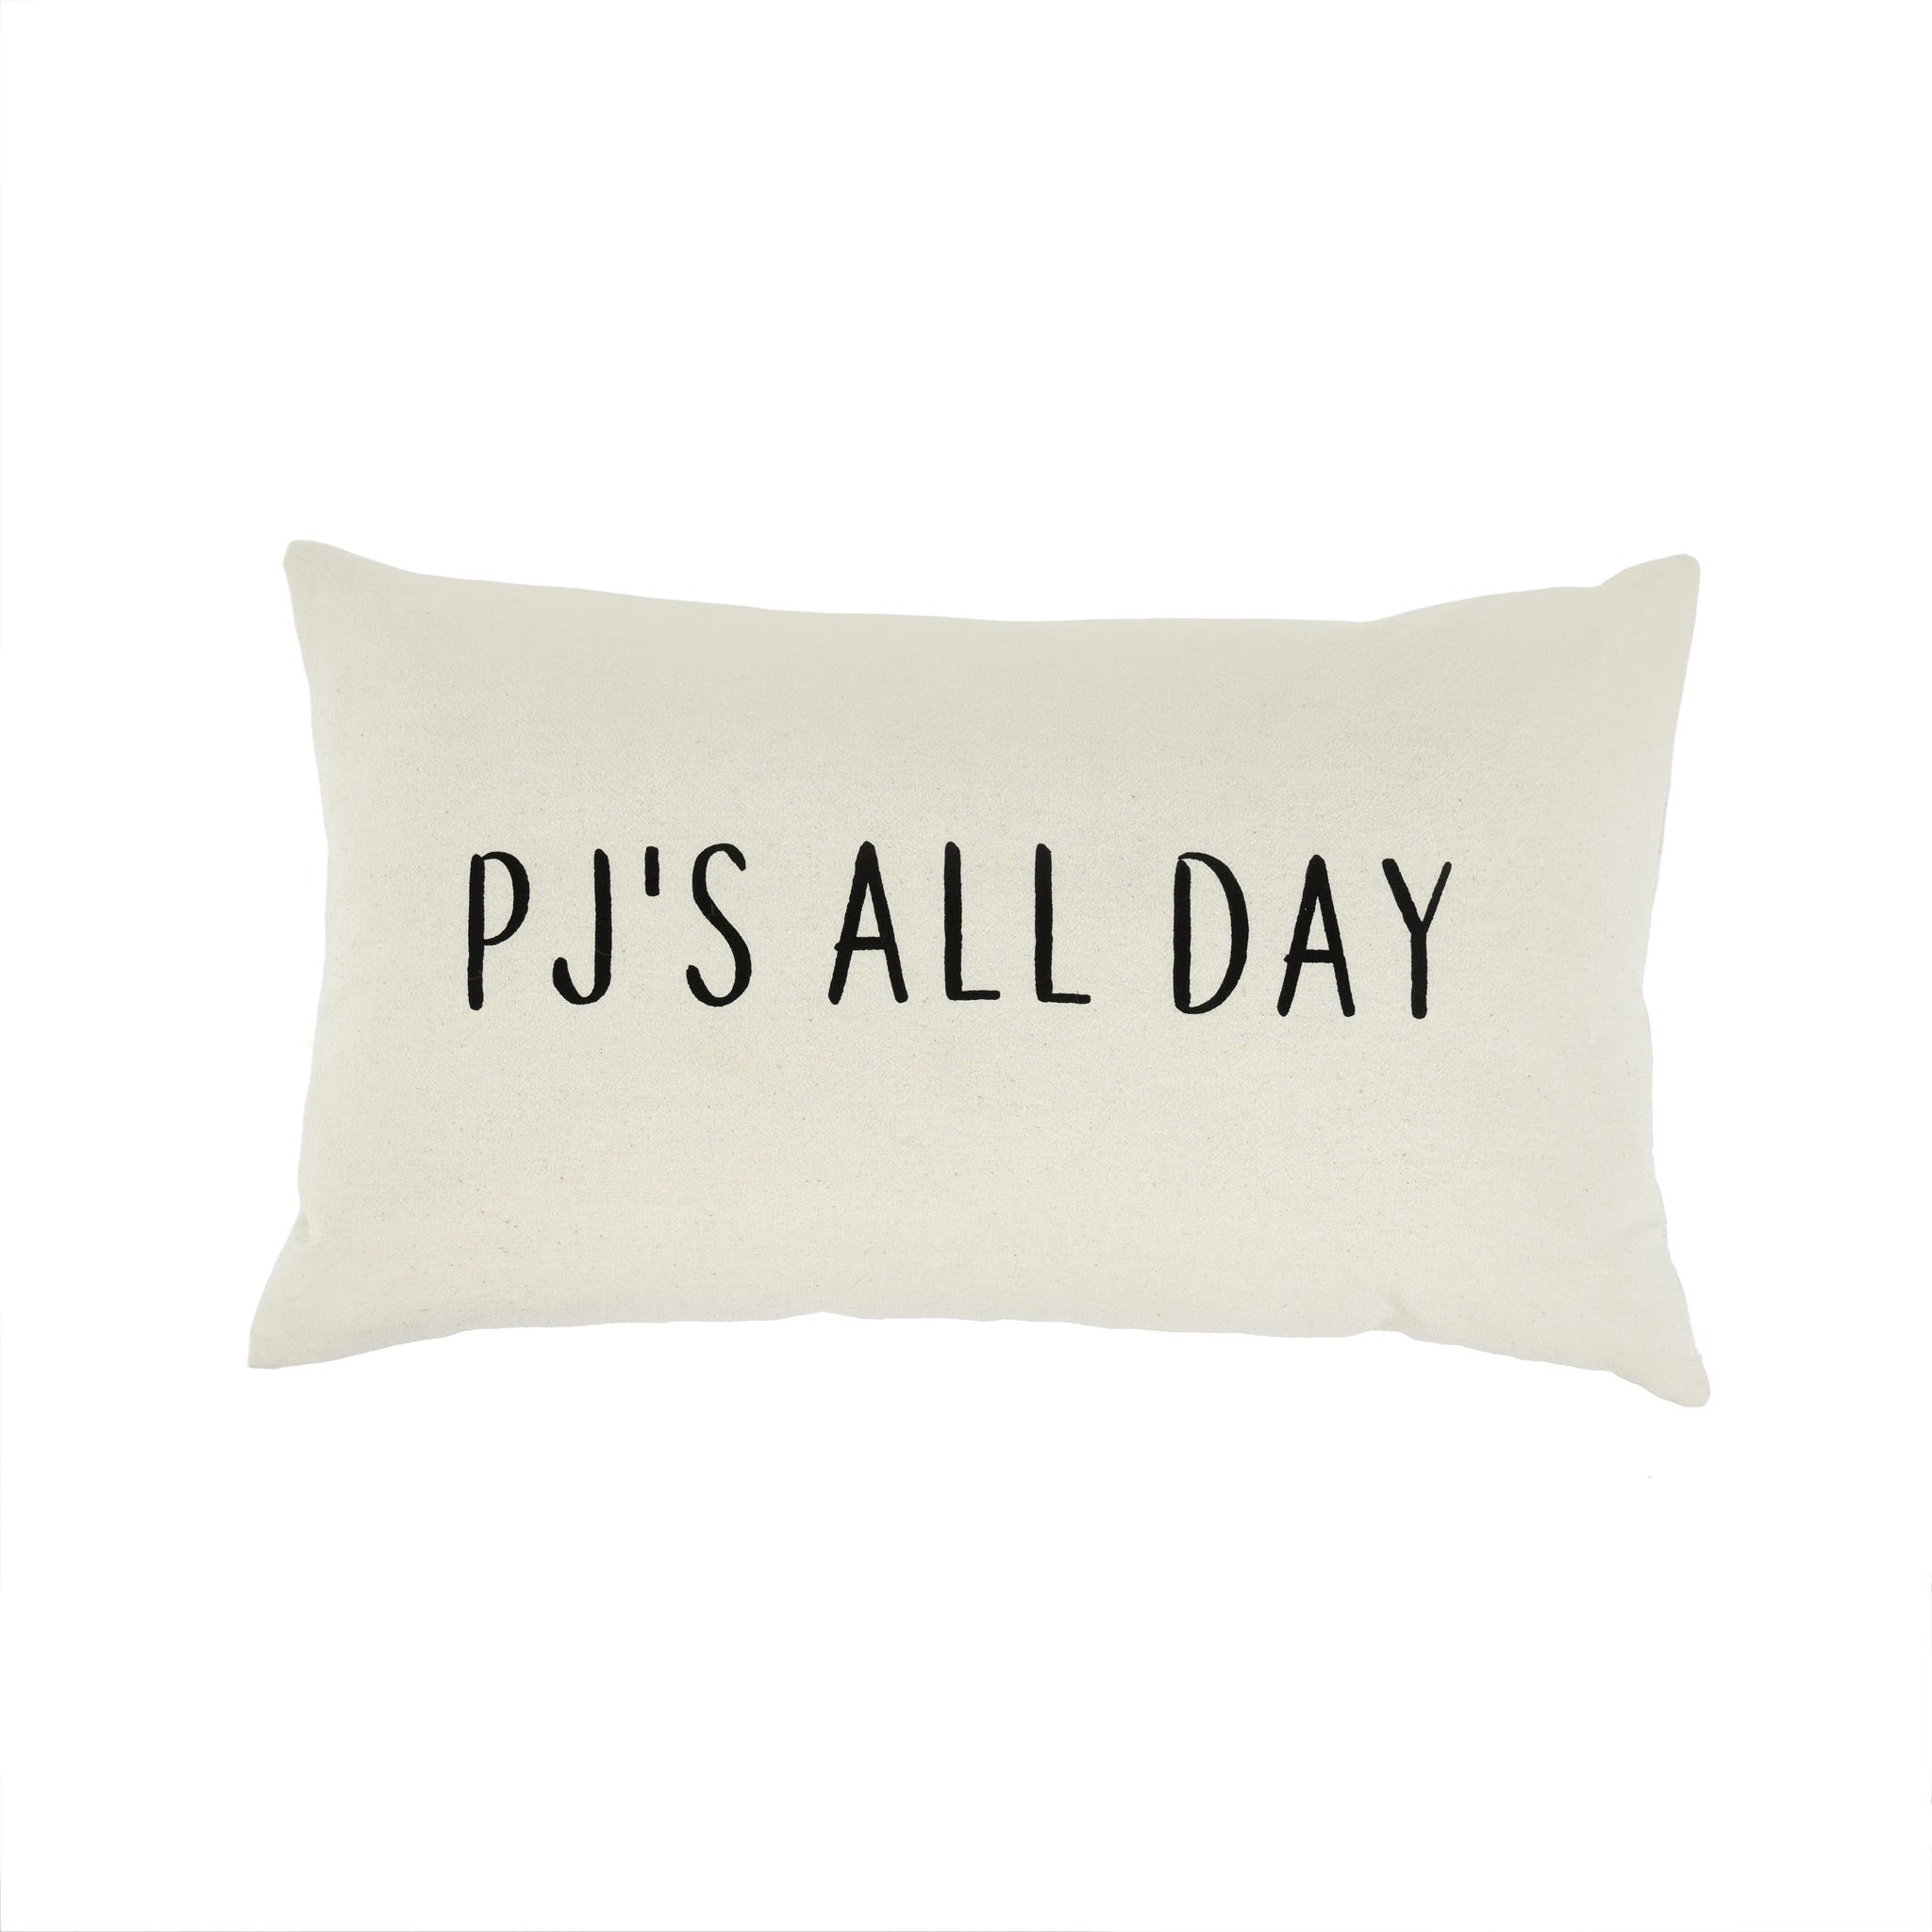 Pillows - Rectangle - PJs All Day